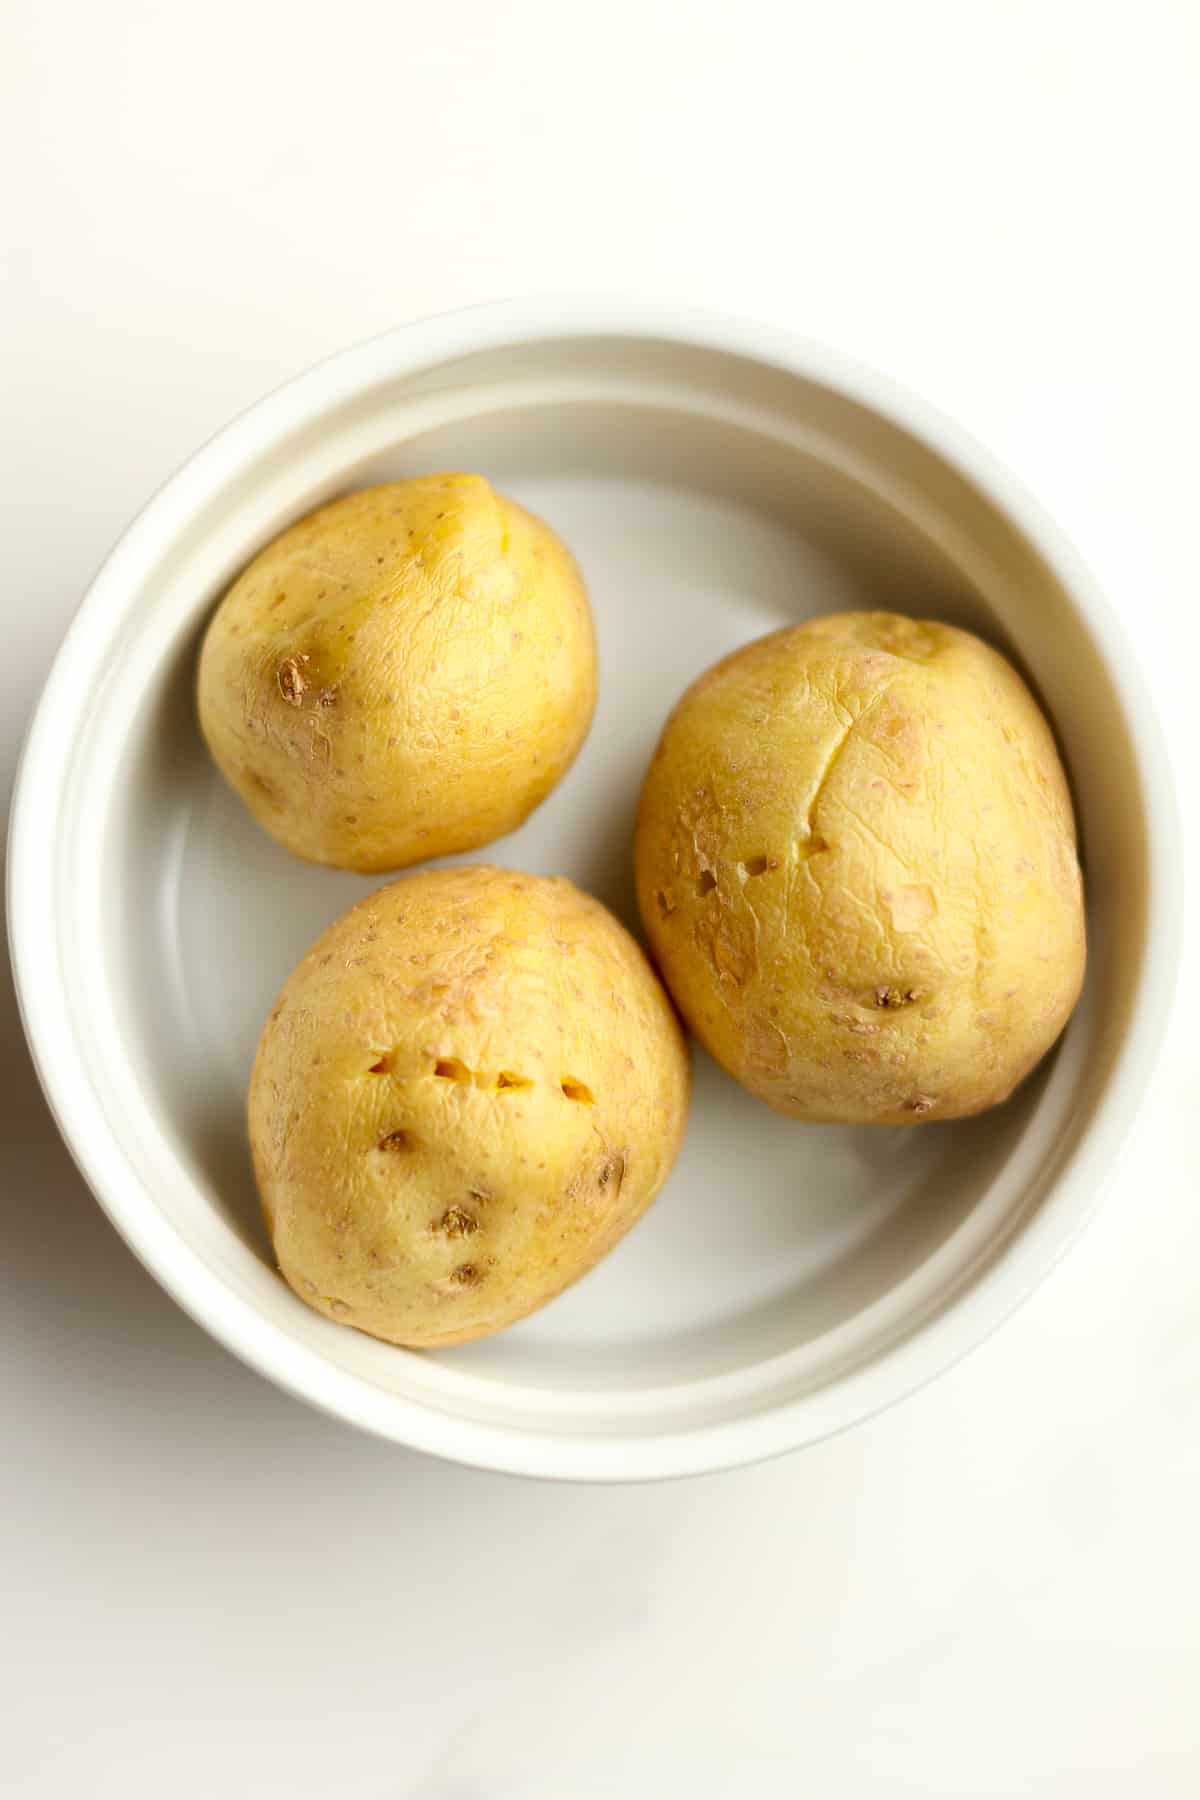 A bowl of three small yellow microwaved potatoes.